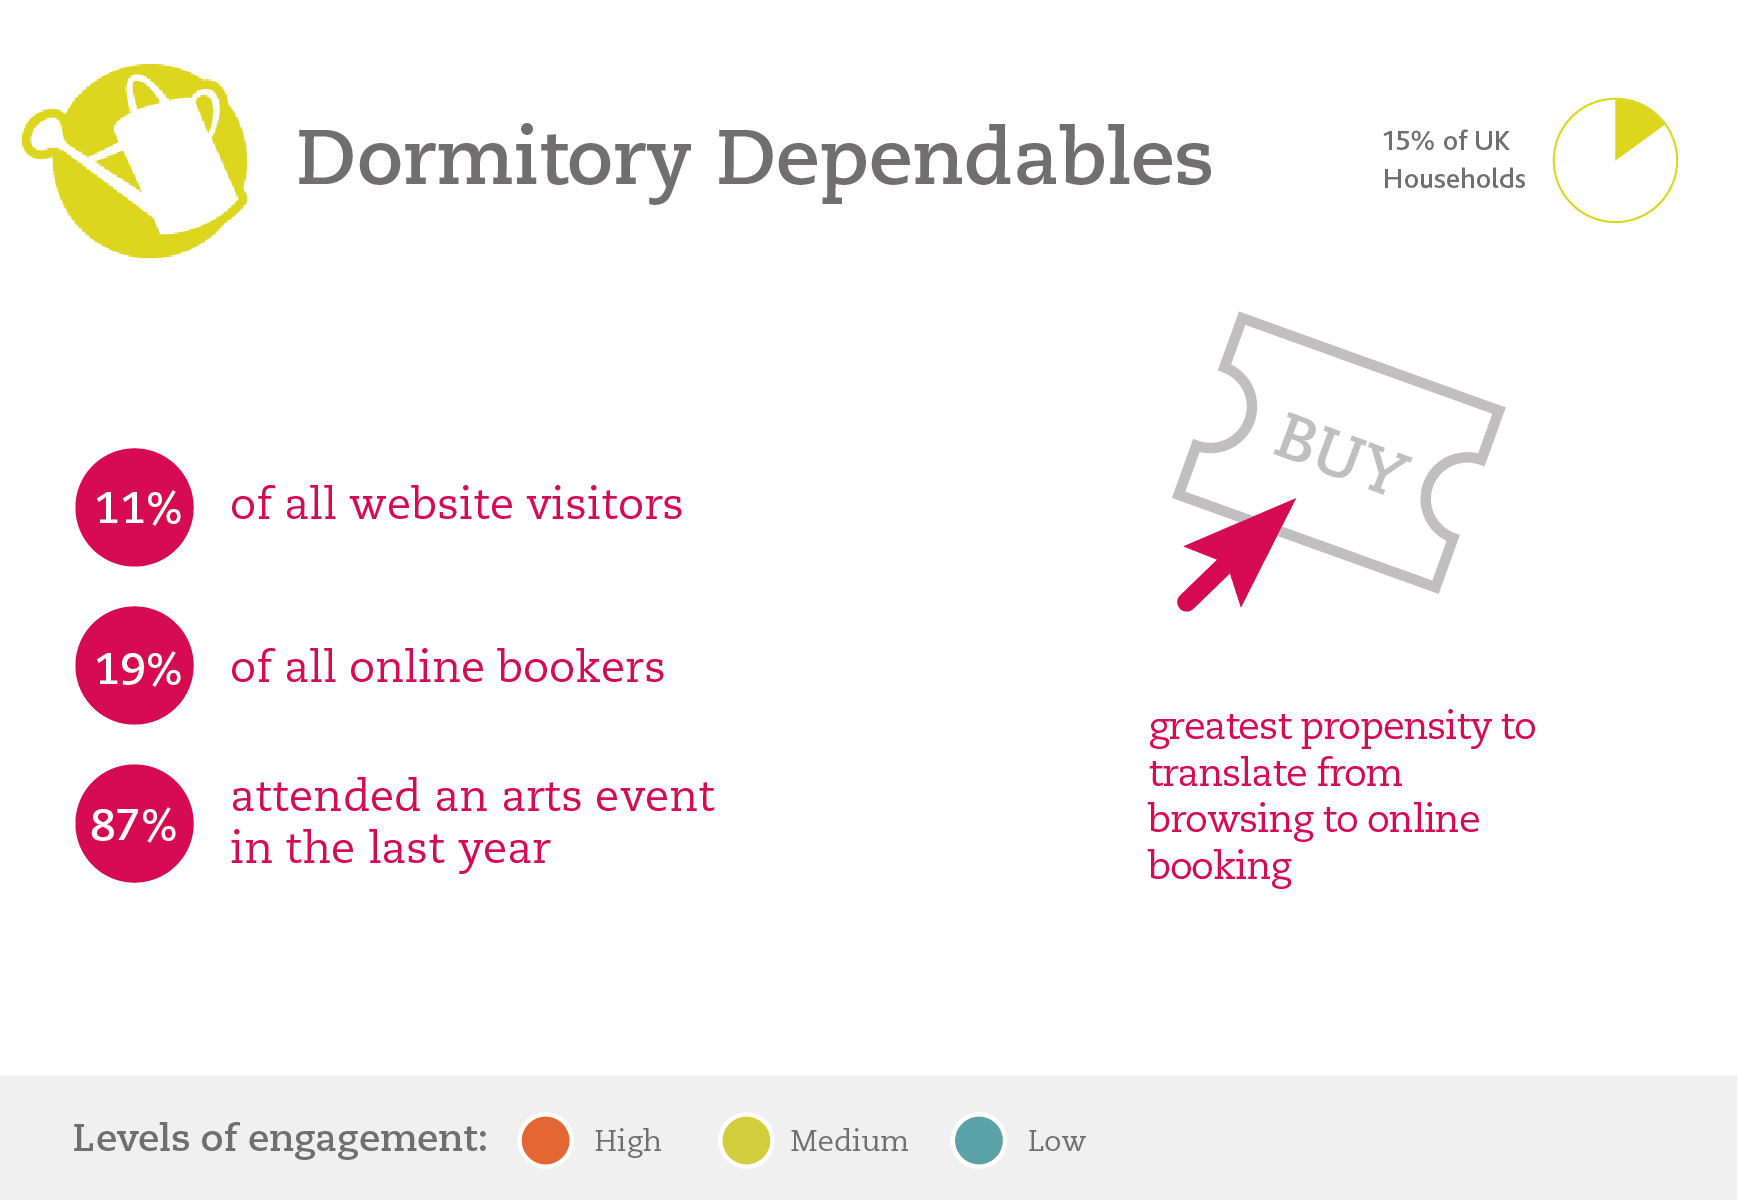 Most Dormitory Dependables live in suburban areas and small towns and have an interest in heritage and mainstream arts. Digital channels are important to this segment and they enjoy searching for information about arts and culture online.